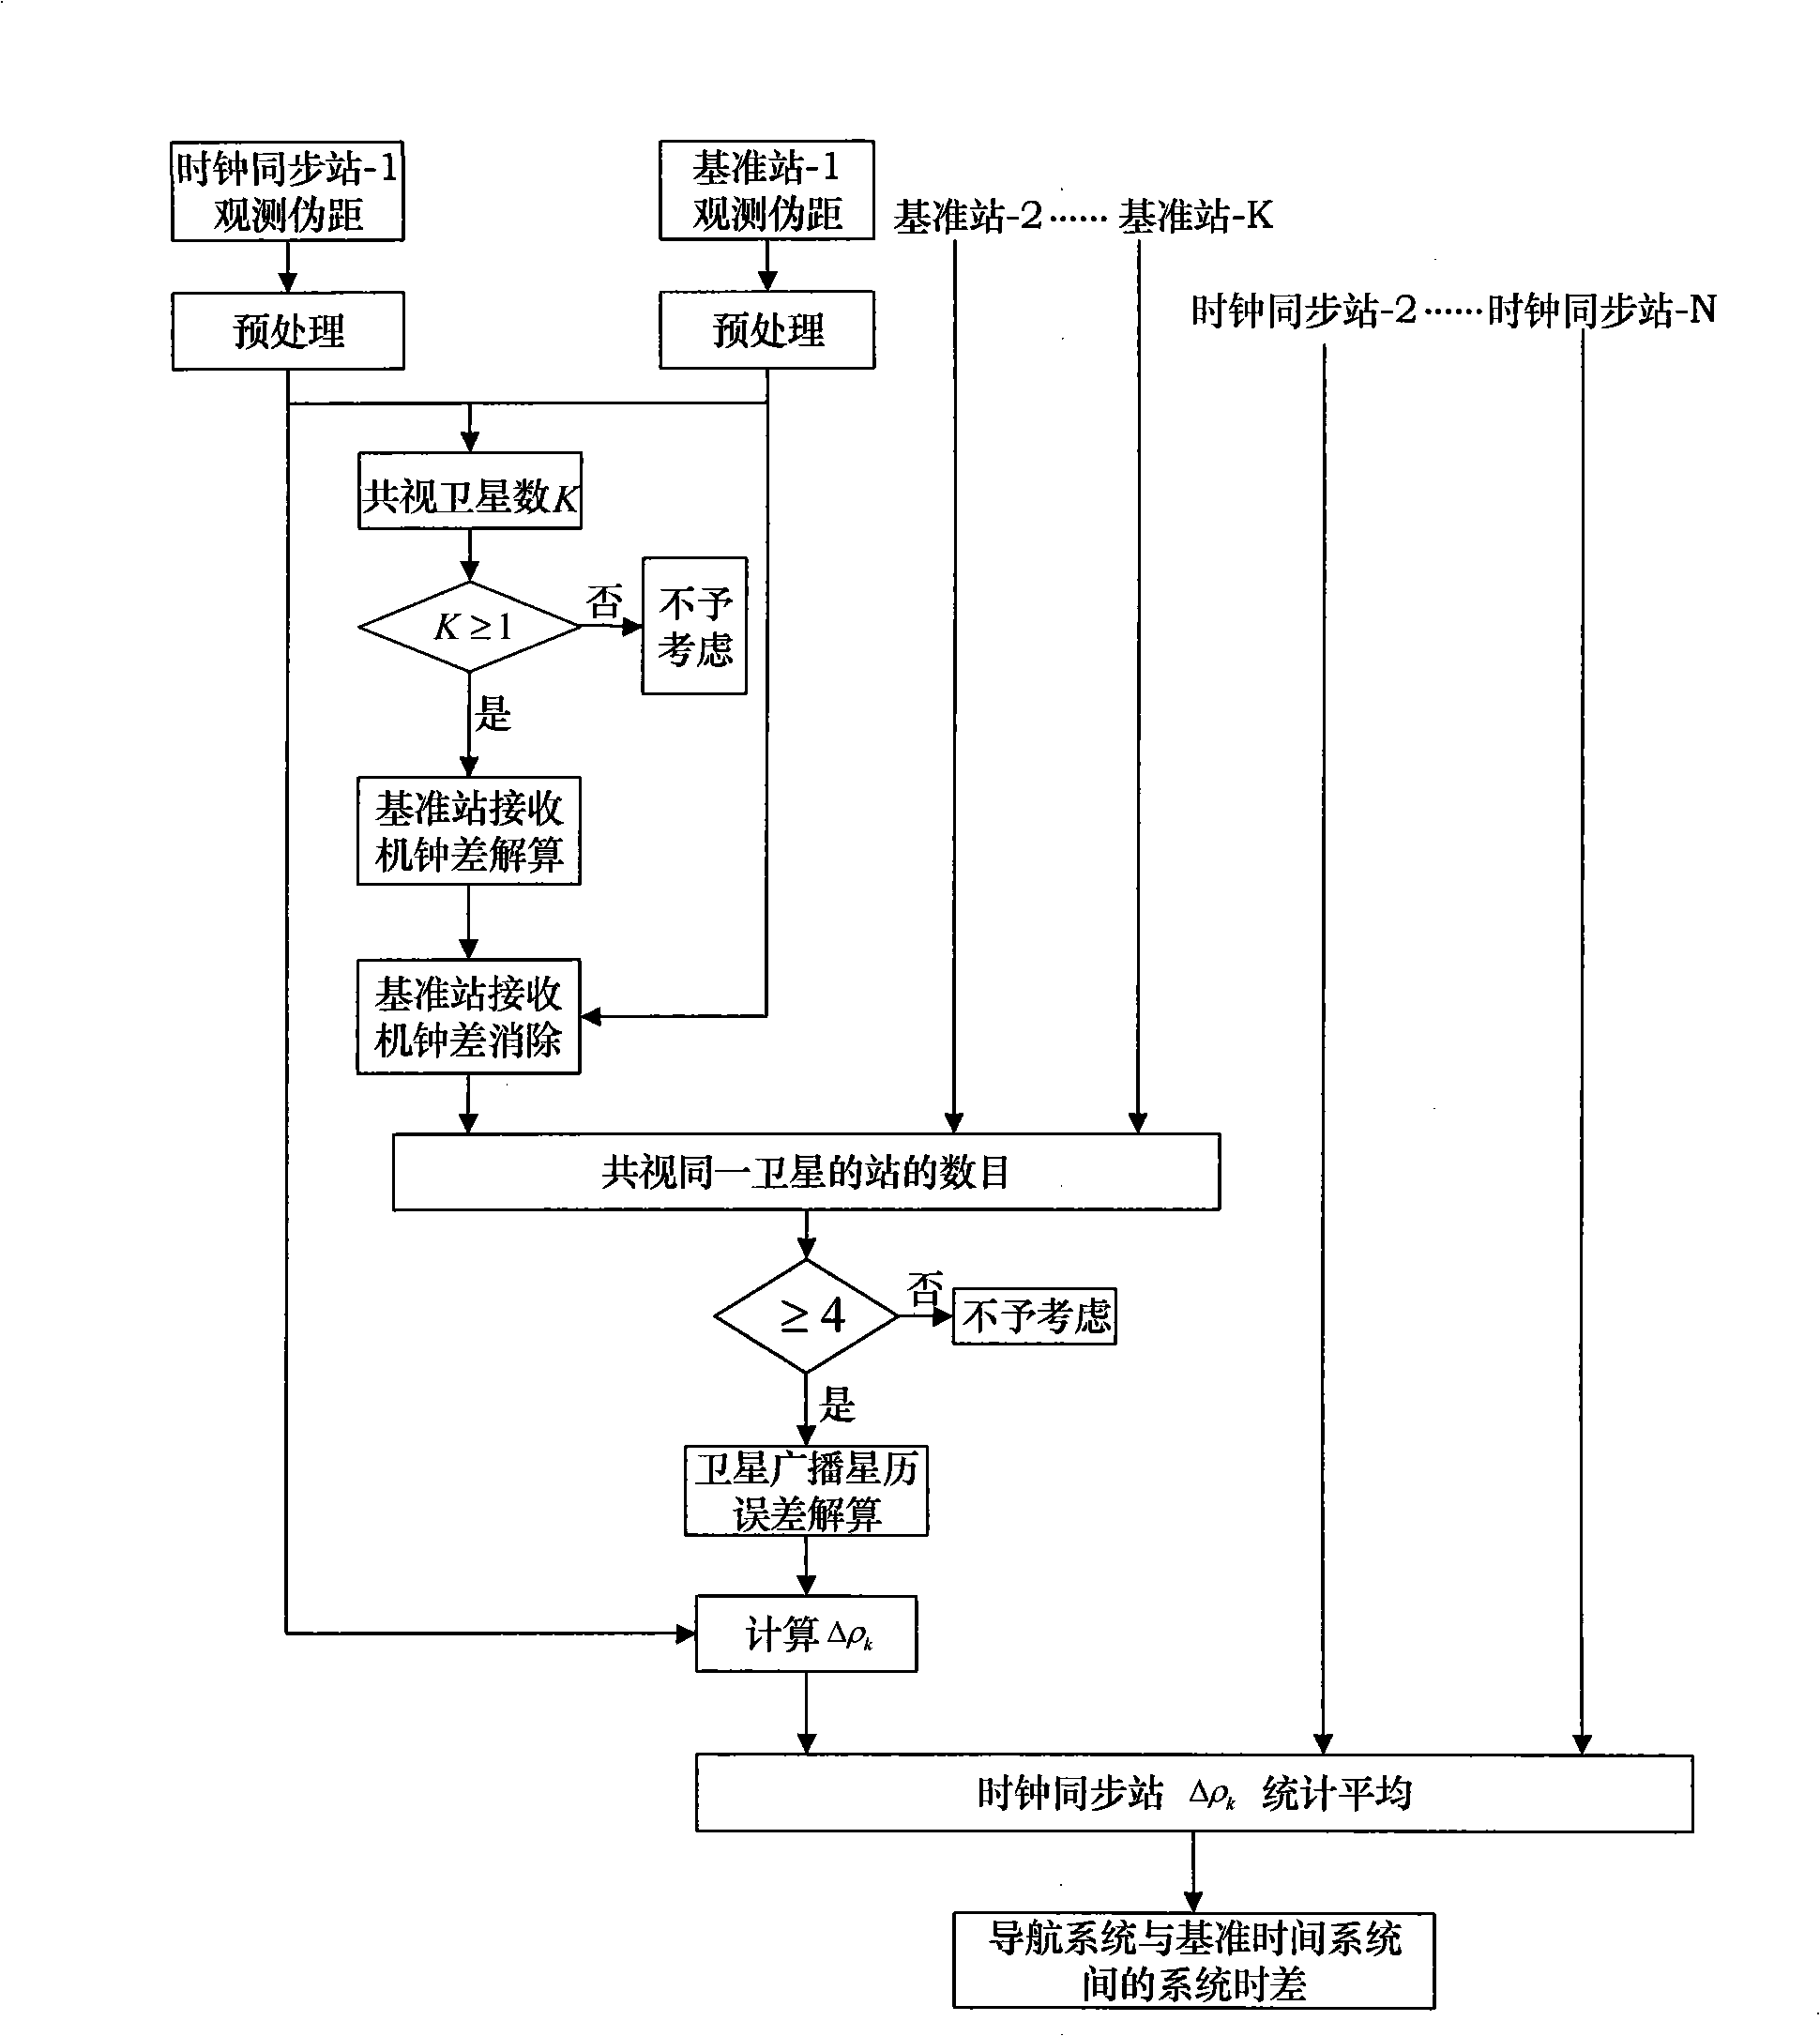 Method for correcting multiple constellation SBAS system time difference